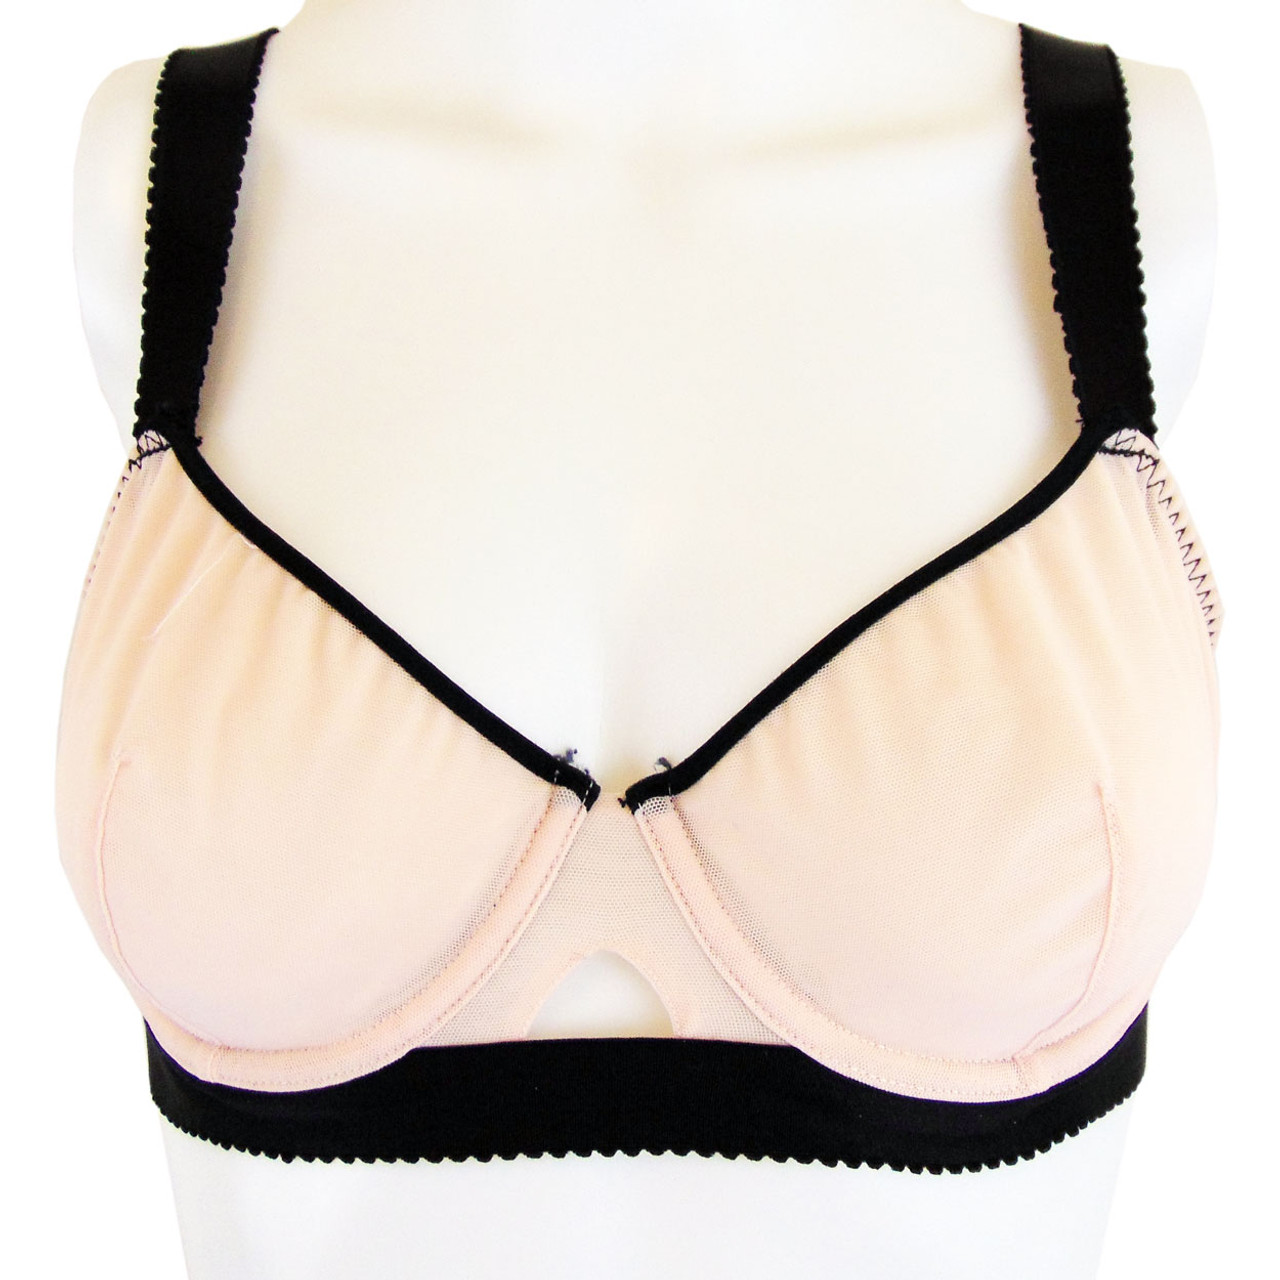 H&M Mesh Peach and Black Underwire Bra - Size 36D  Onestop-Thriftshop  Consignment and Discount Bouitique